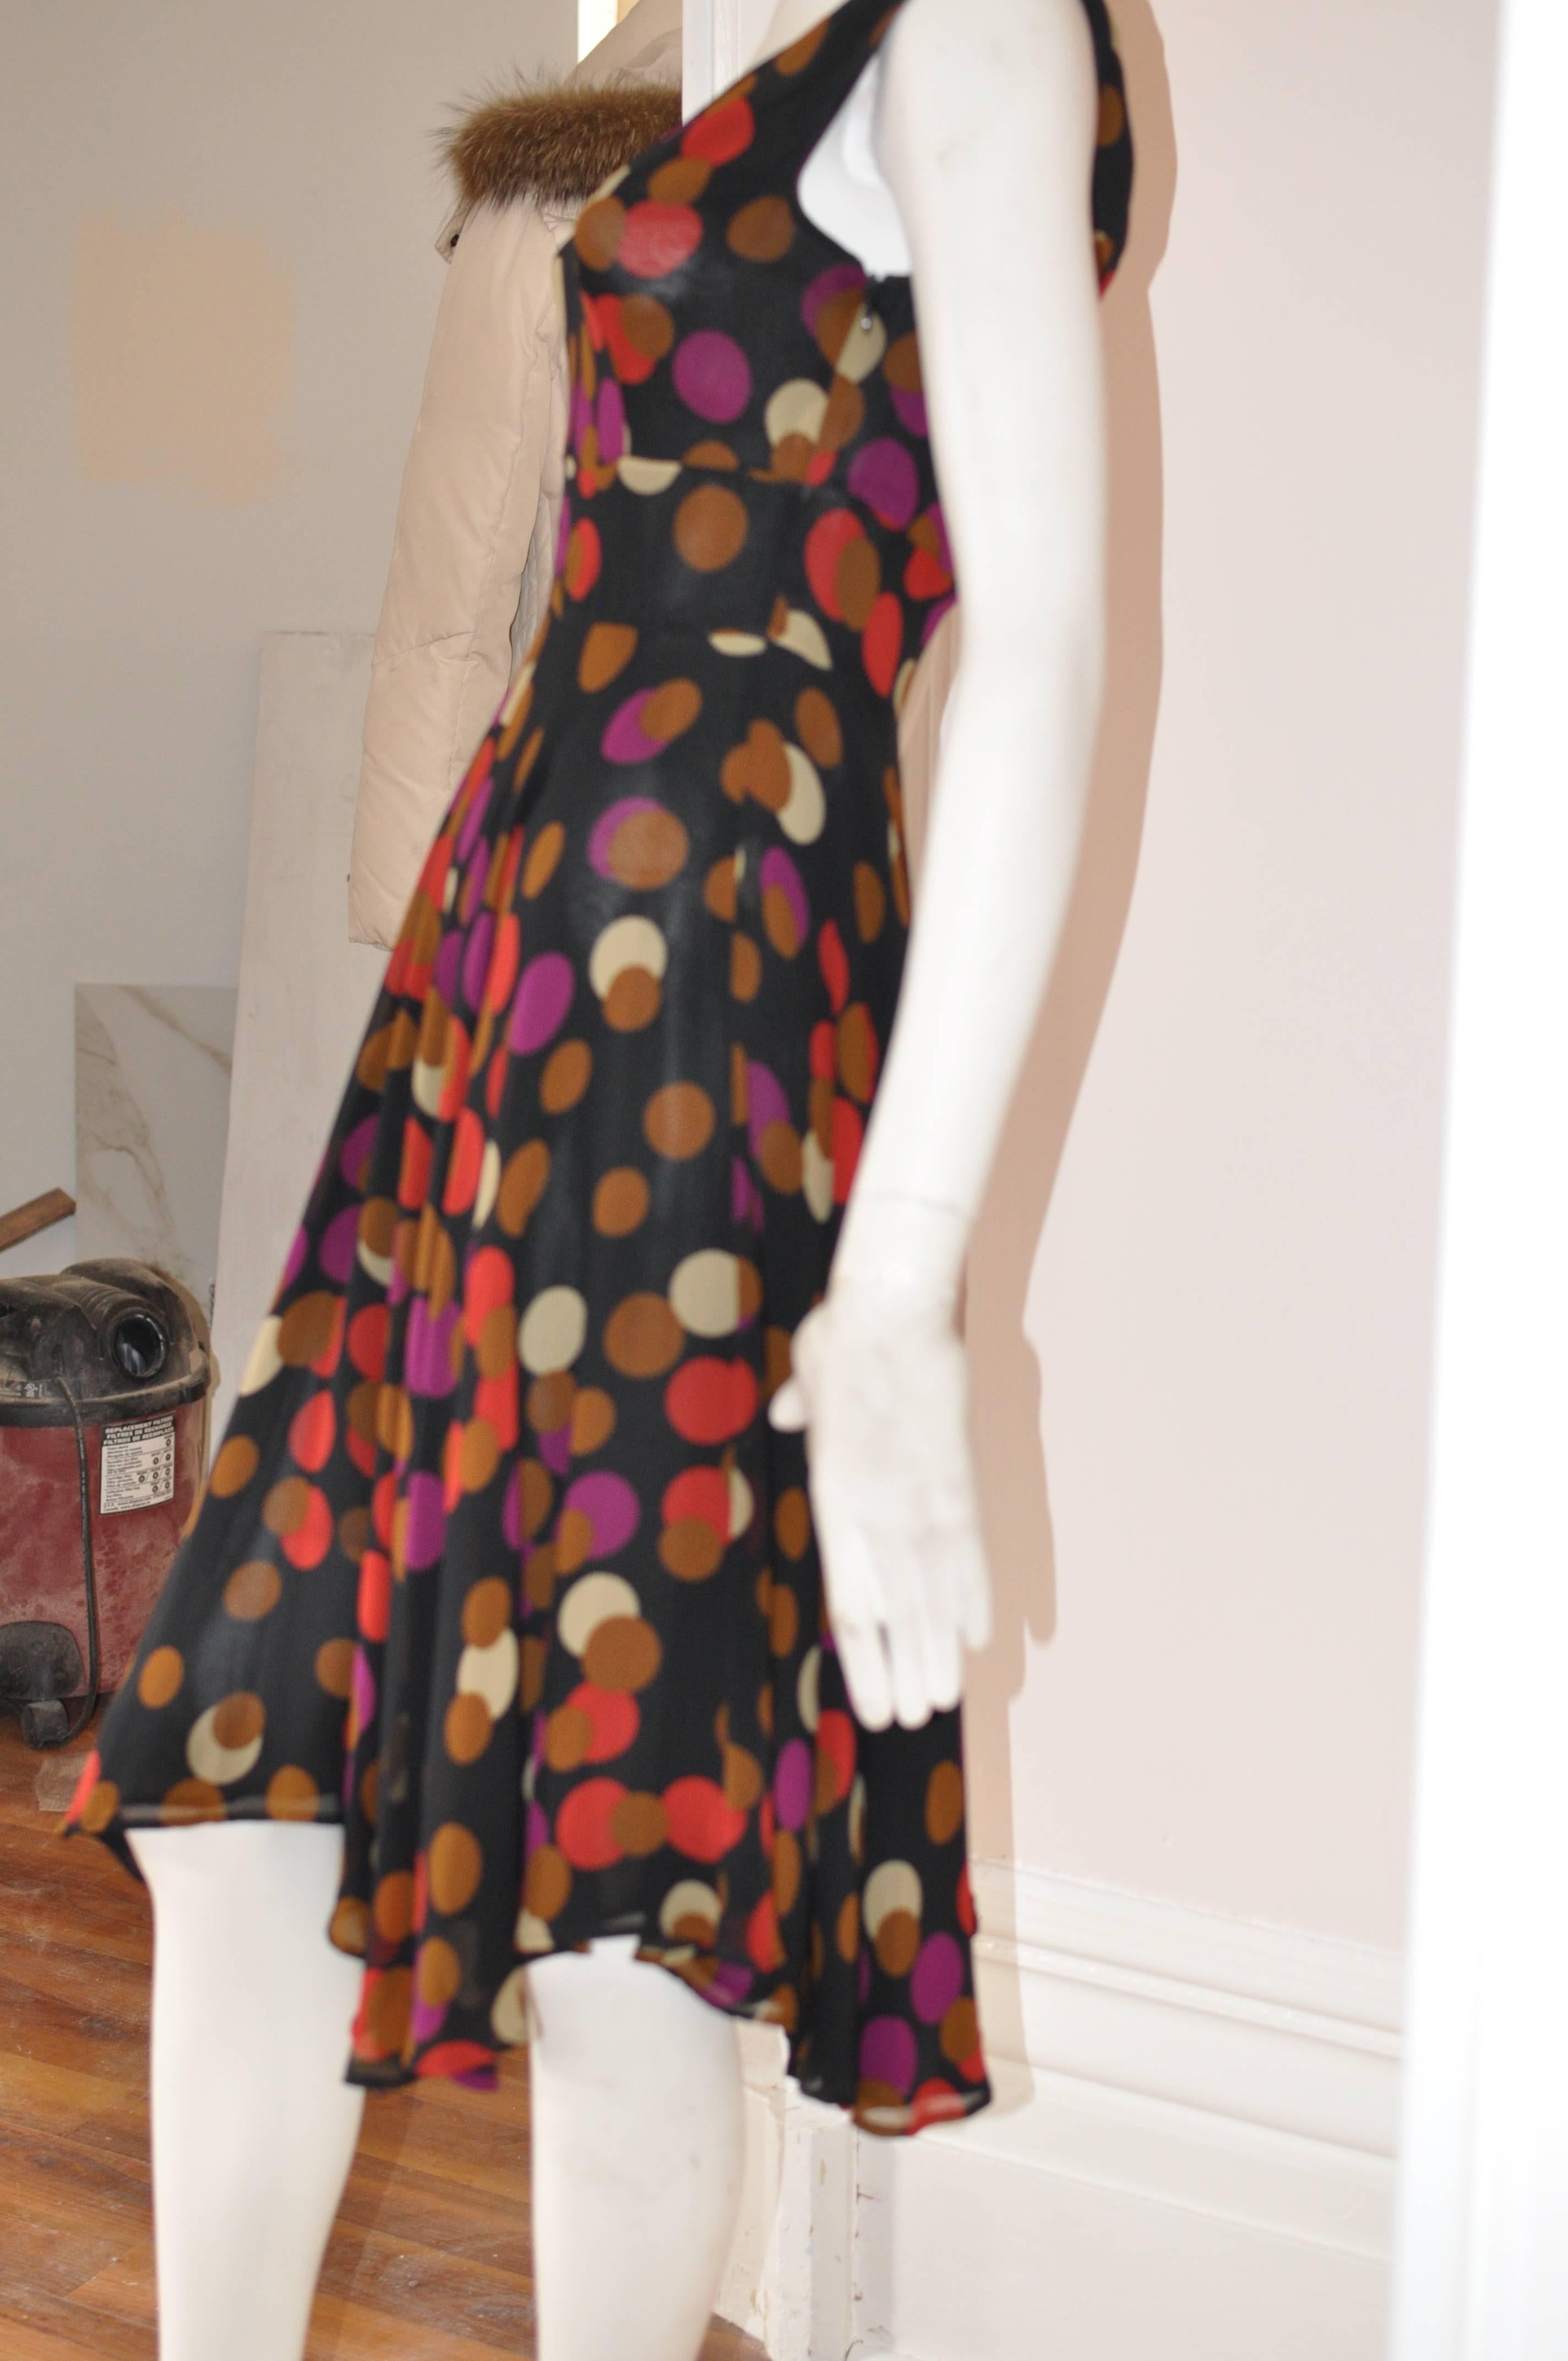 Lovely 100% silk dress with handkerchief hems and fully lined. The dress has a multicolored circle motif on a black background; a defined broad waist band, and a side zip closure.

Can be worn day or evening.